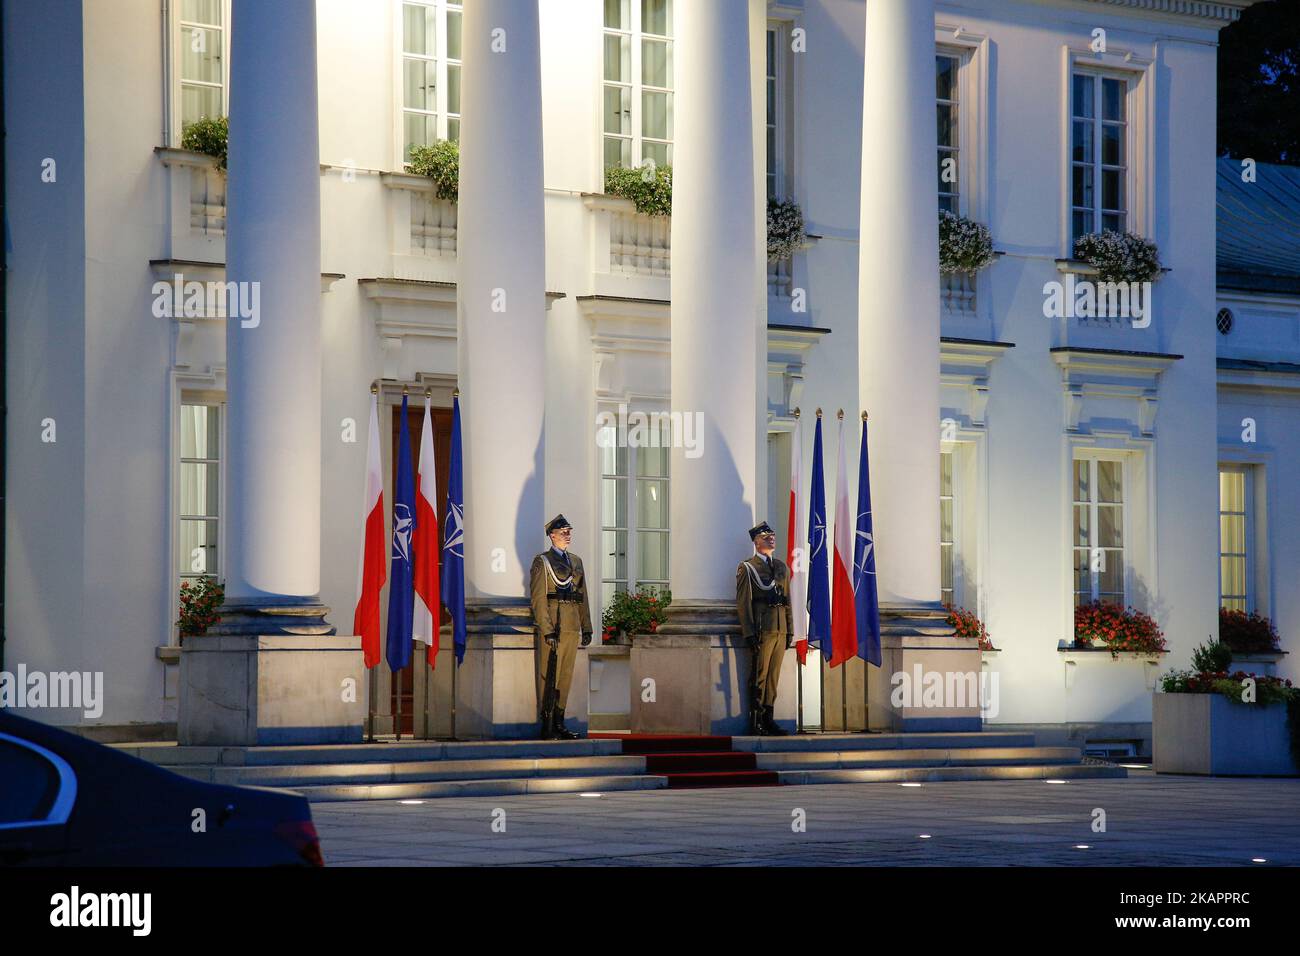 The Belweder palace is seen where Polish president Andrzej Duda will welcome NATO secretary general Jens Stoltenberg on 24 August, 2017. (Photo by Jaap Arriens/NurPhoto) Stock Photo